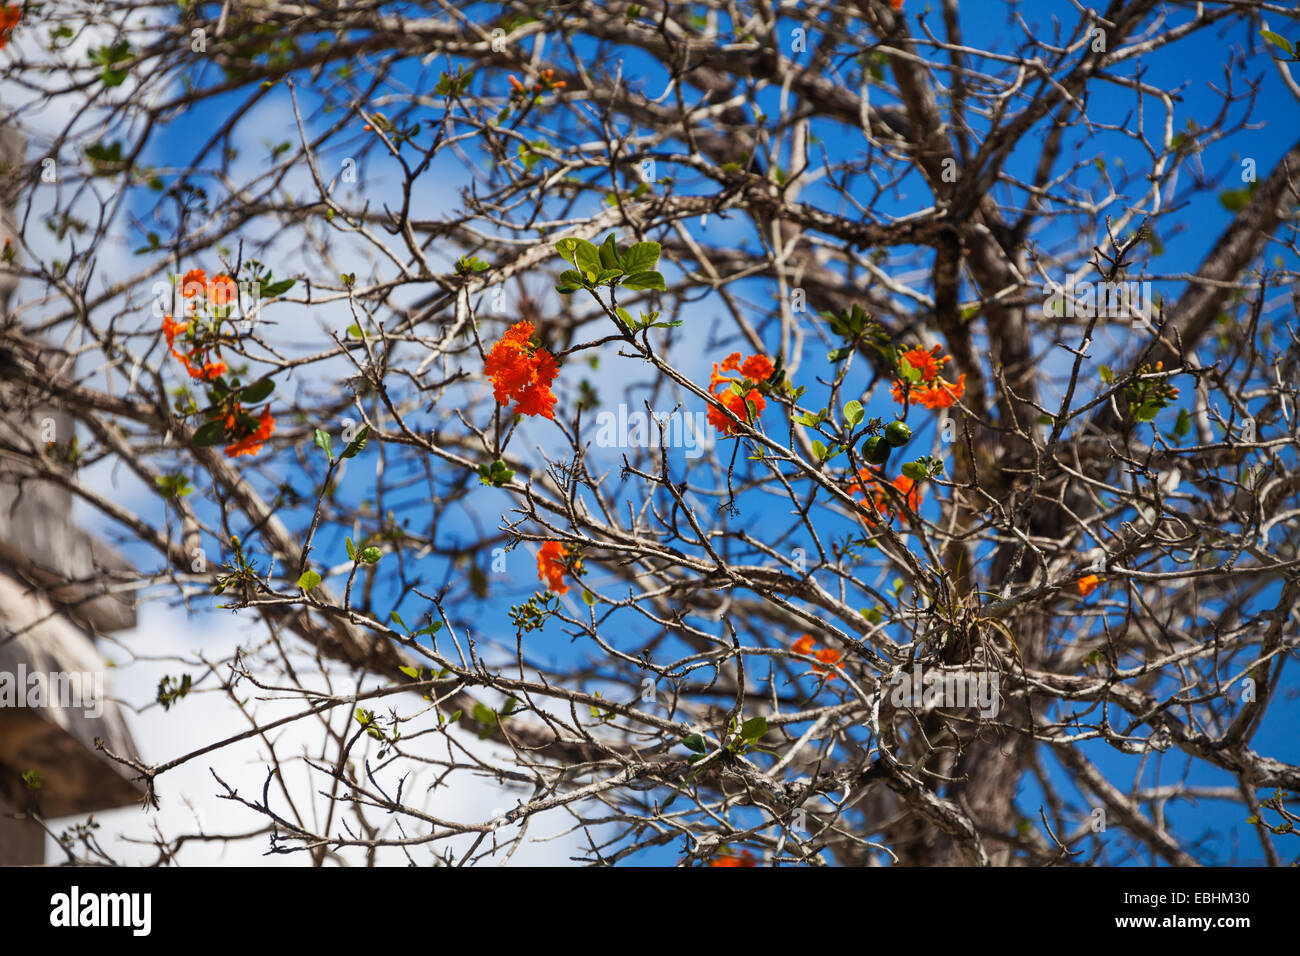 Cordia Dodecandra tree with red flowers in Mexico Stock Photo